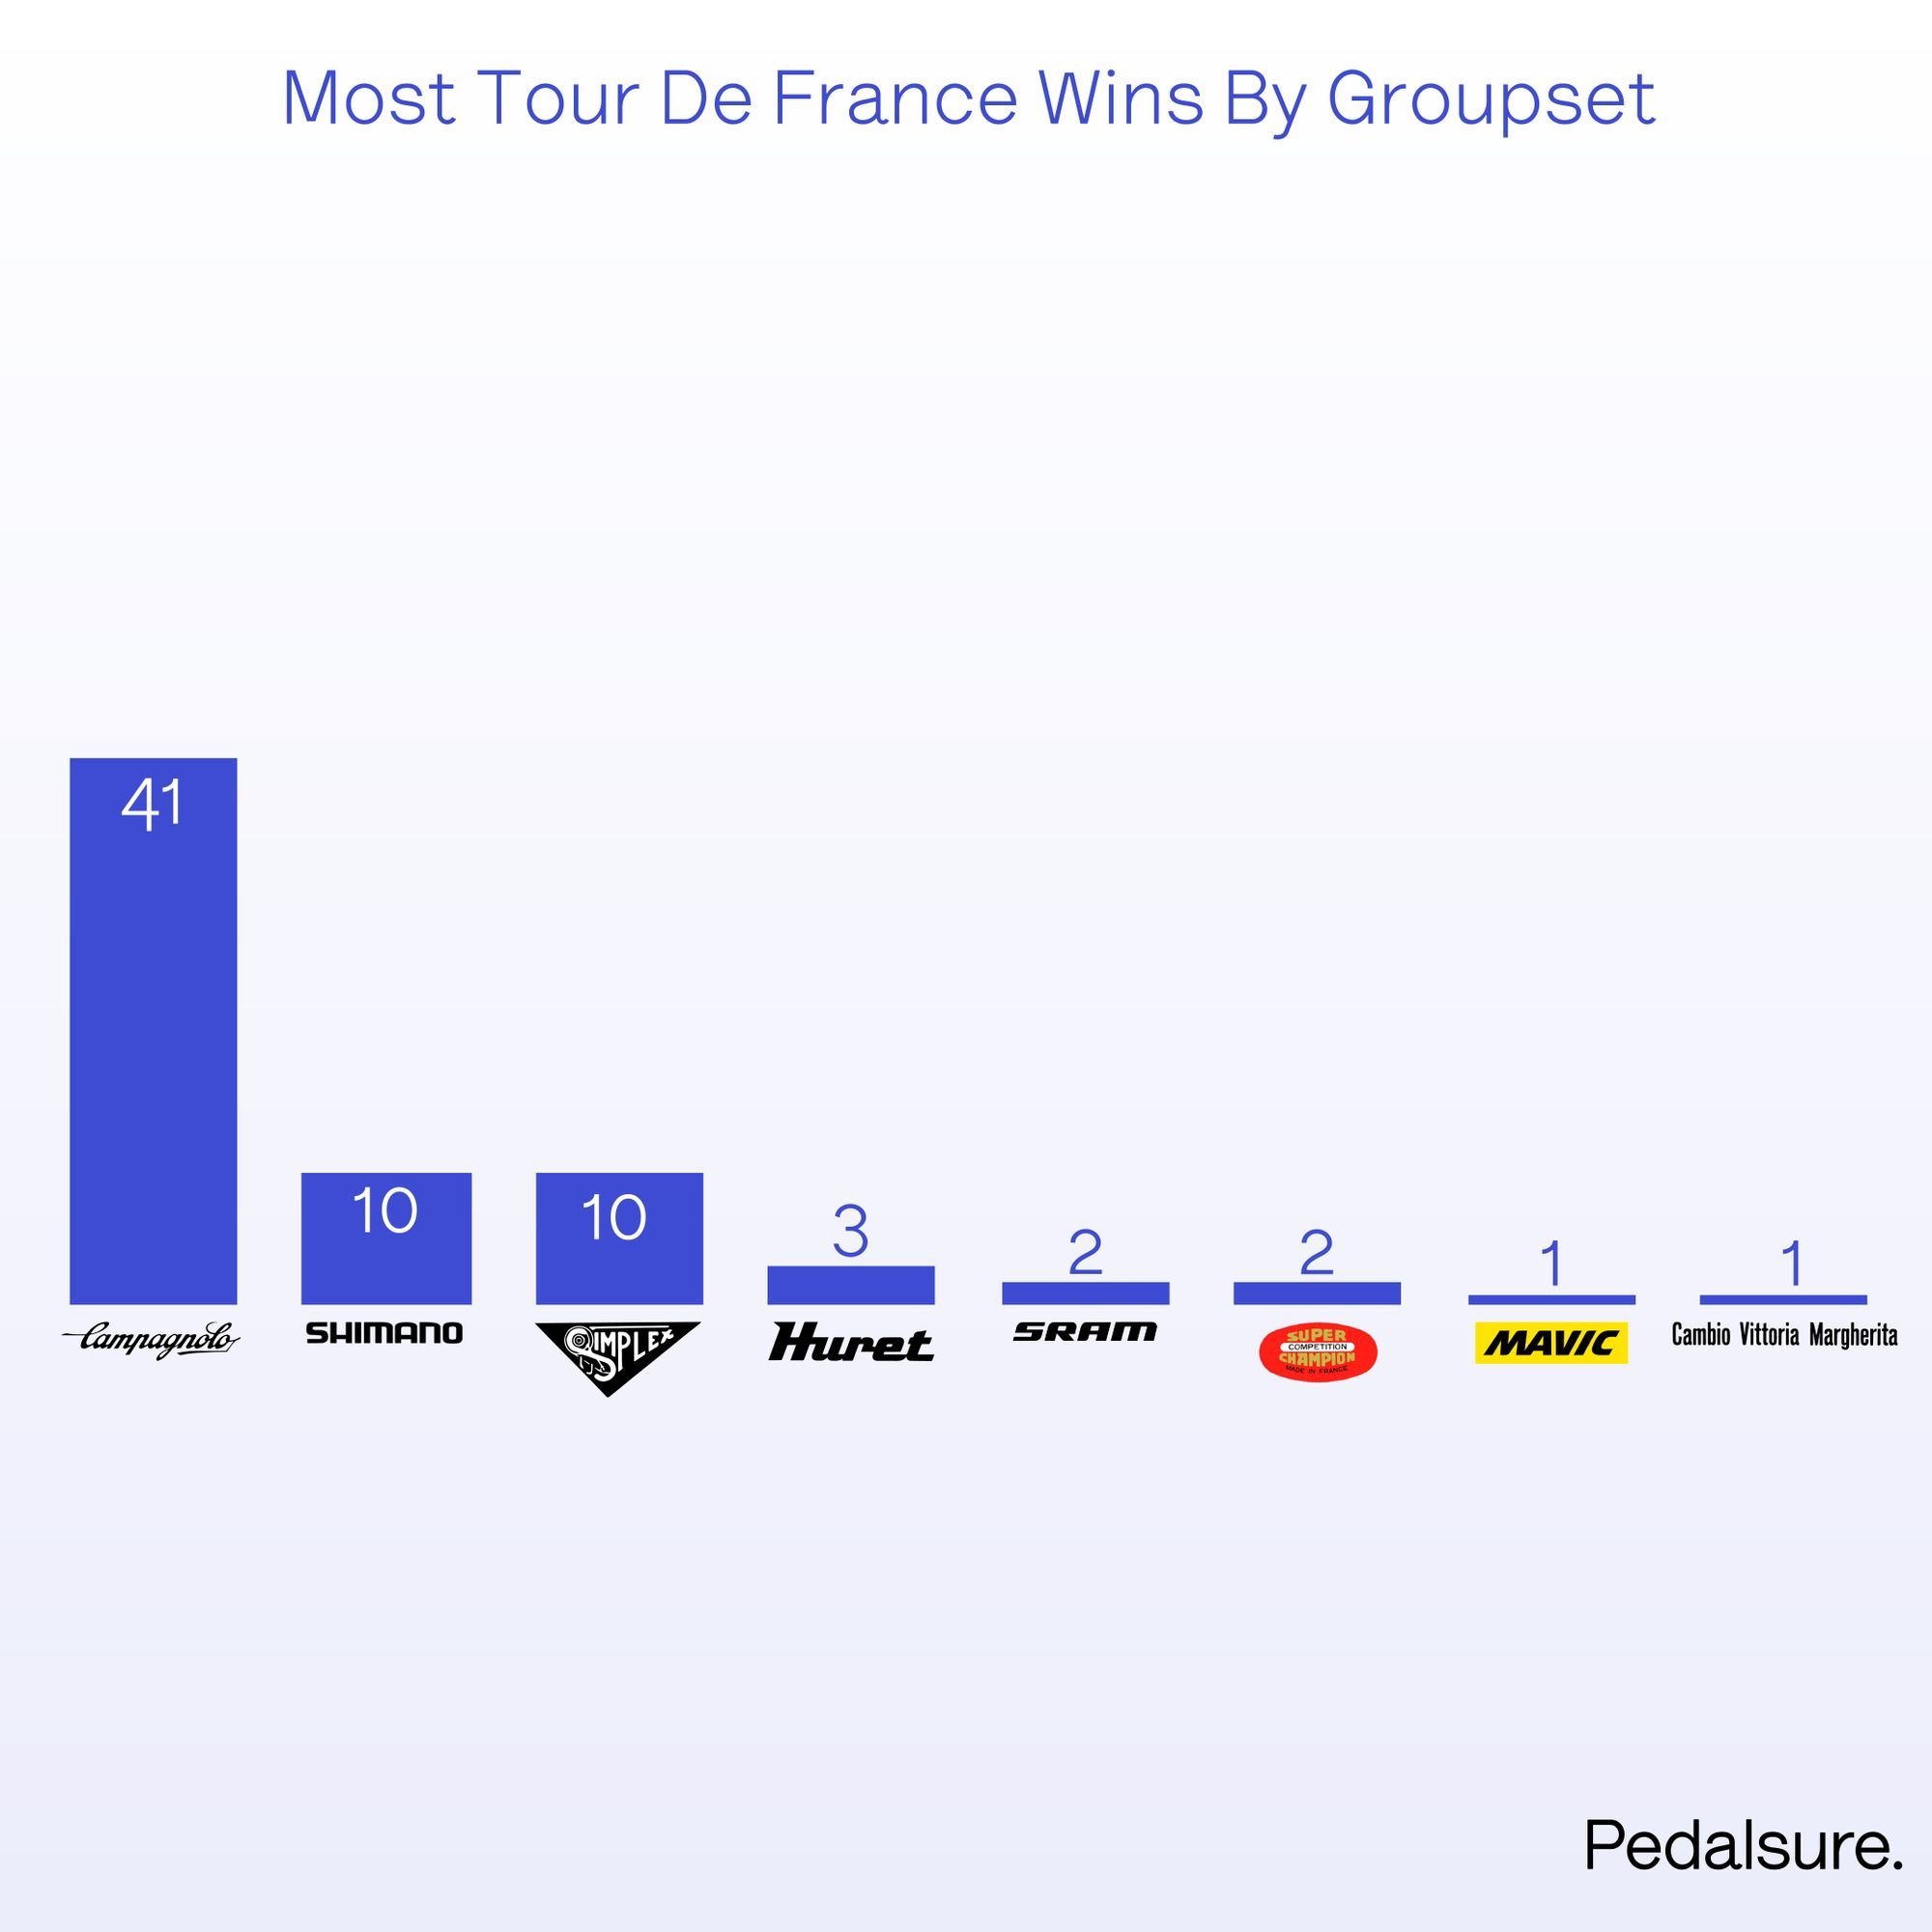 Most wins by groupset at the Tour de France